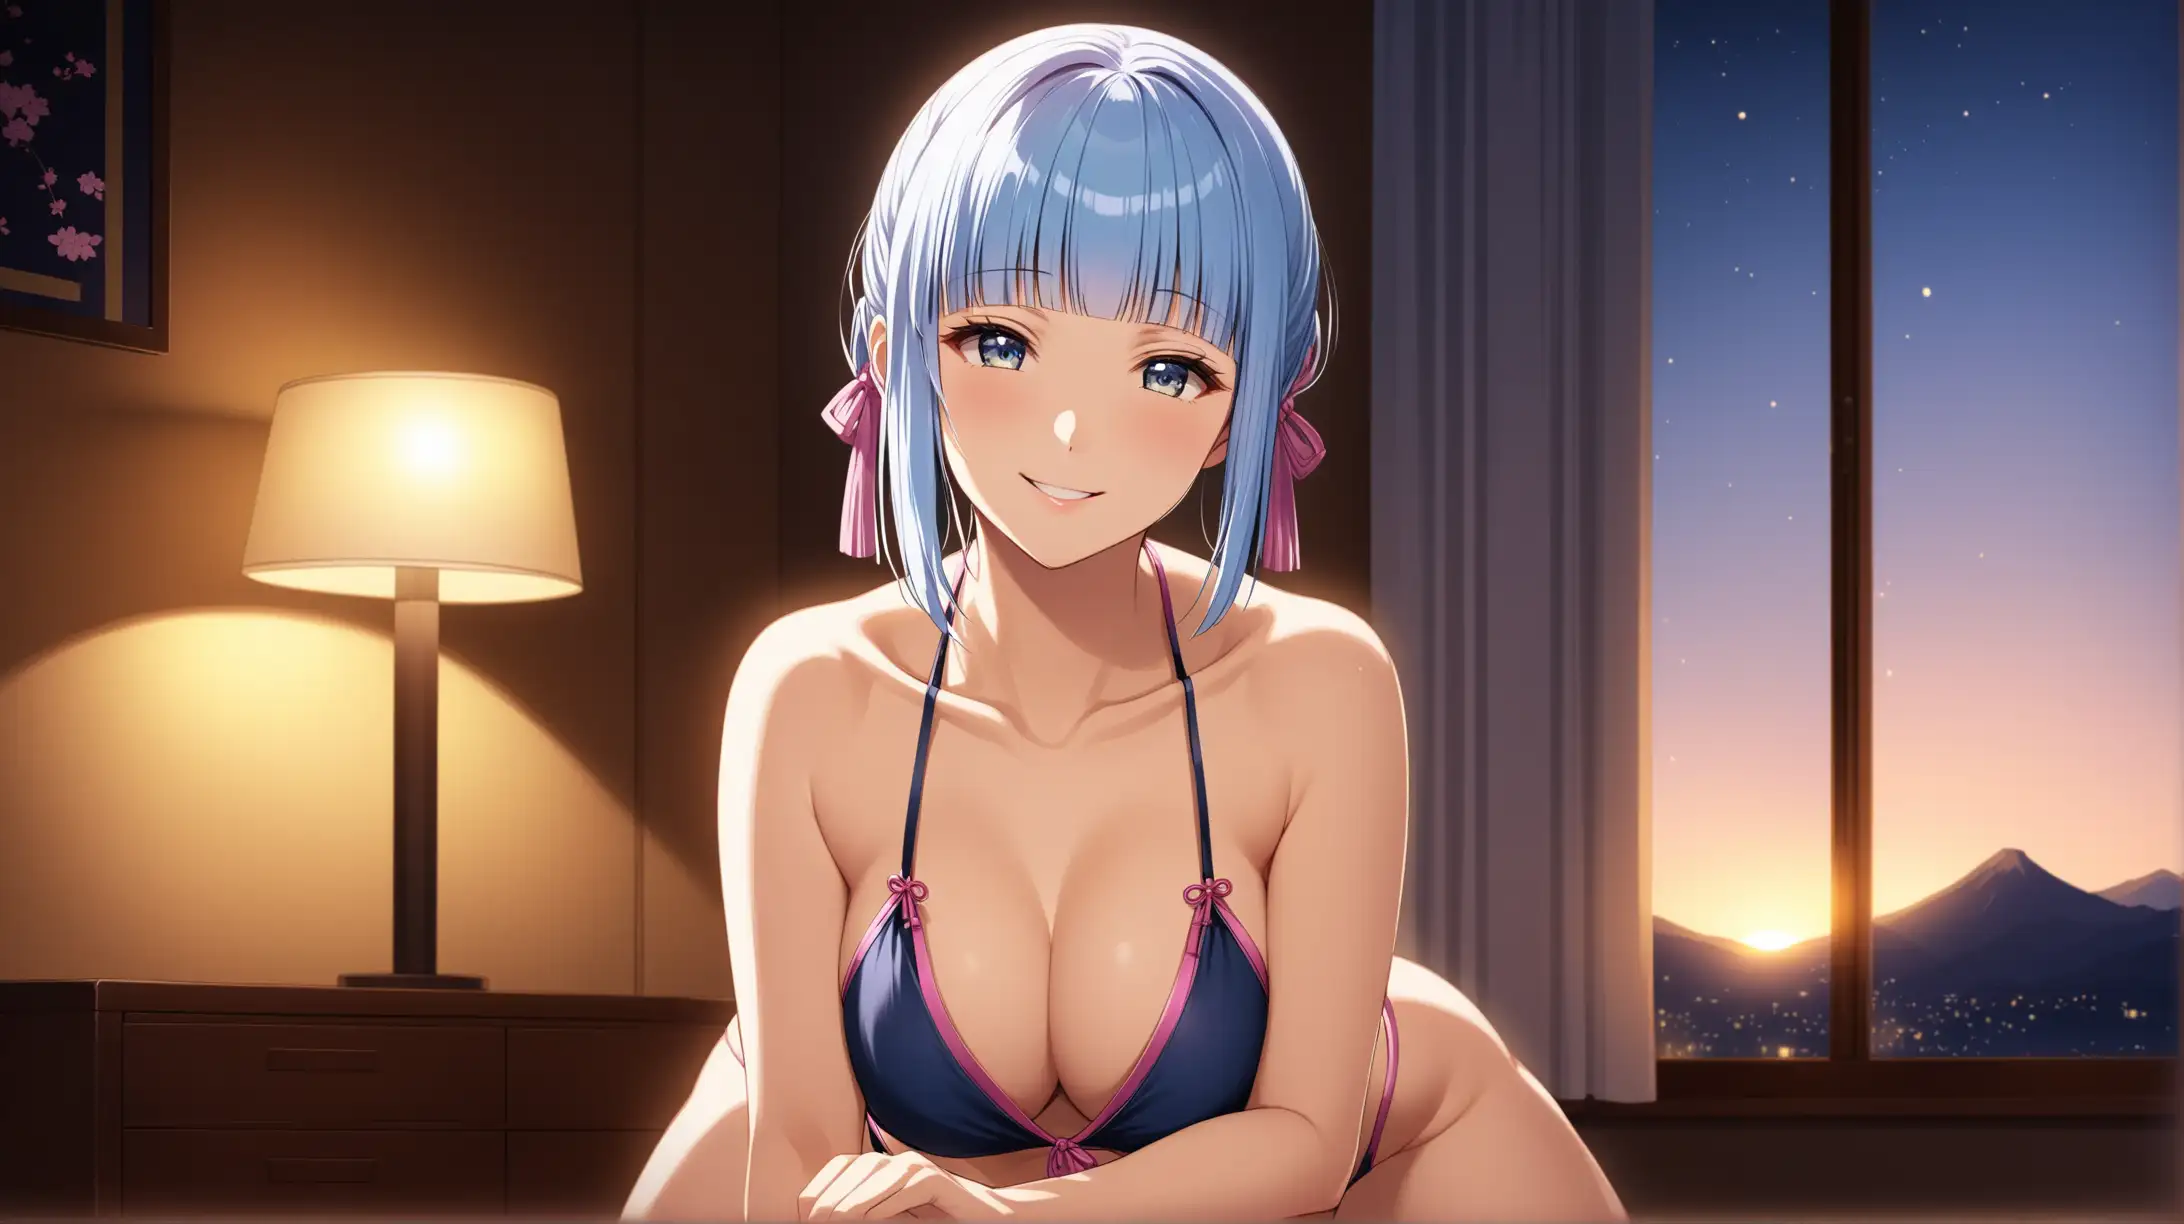 Draw the character Ayaka Kamisato, high quality, ambient lighting, long shot, indoors, seductive pose, wearing a revealing outfit, smiling at the viewer